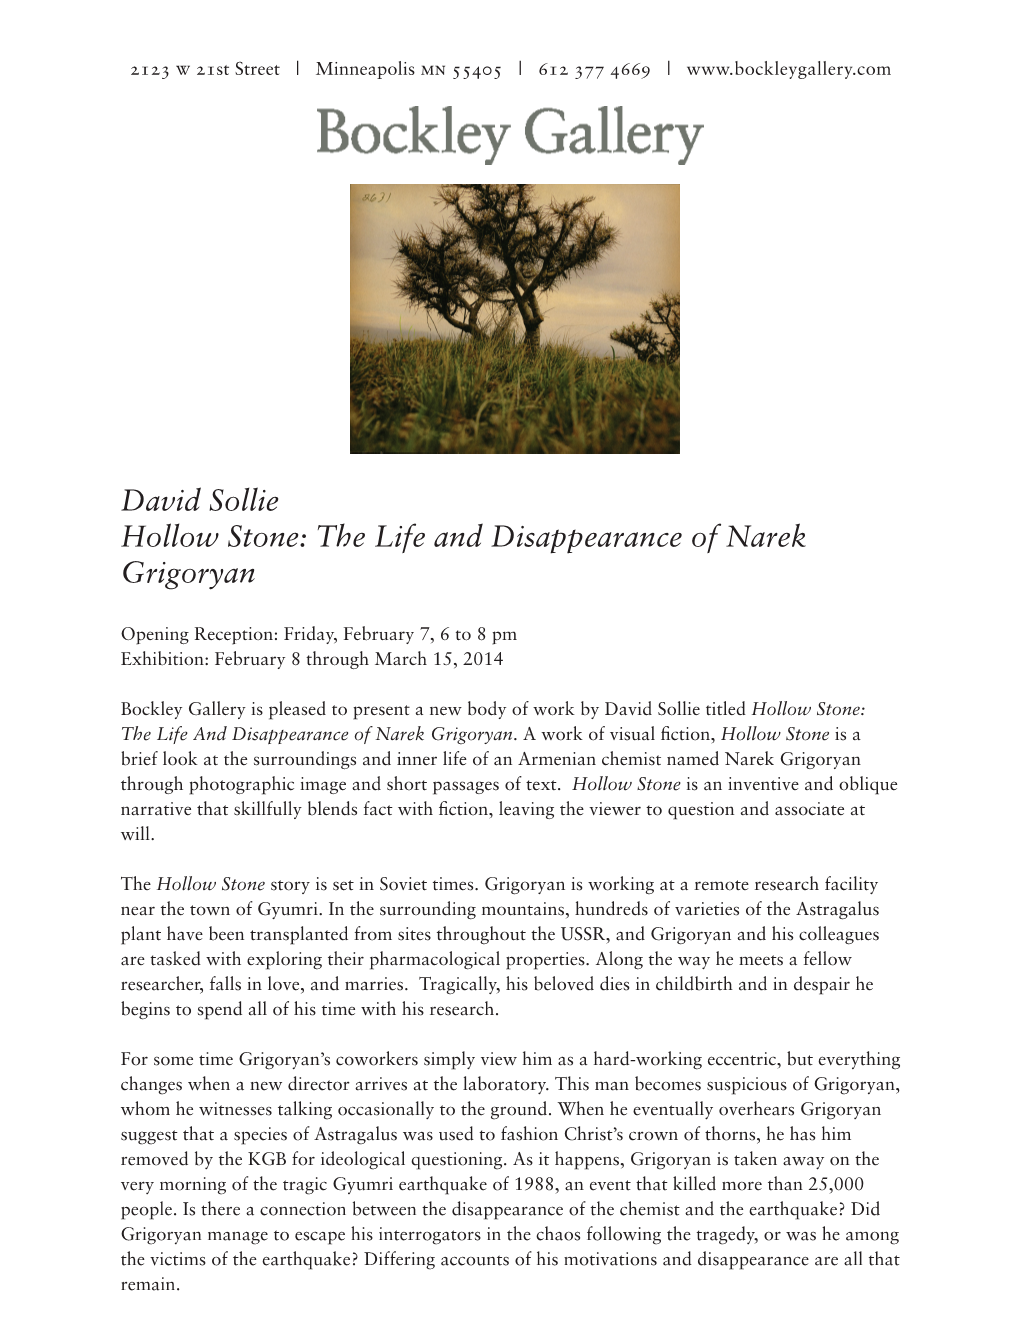 David Sollie Hollow Stone: the Life and Disappearance of Narek Grigoryan